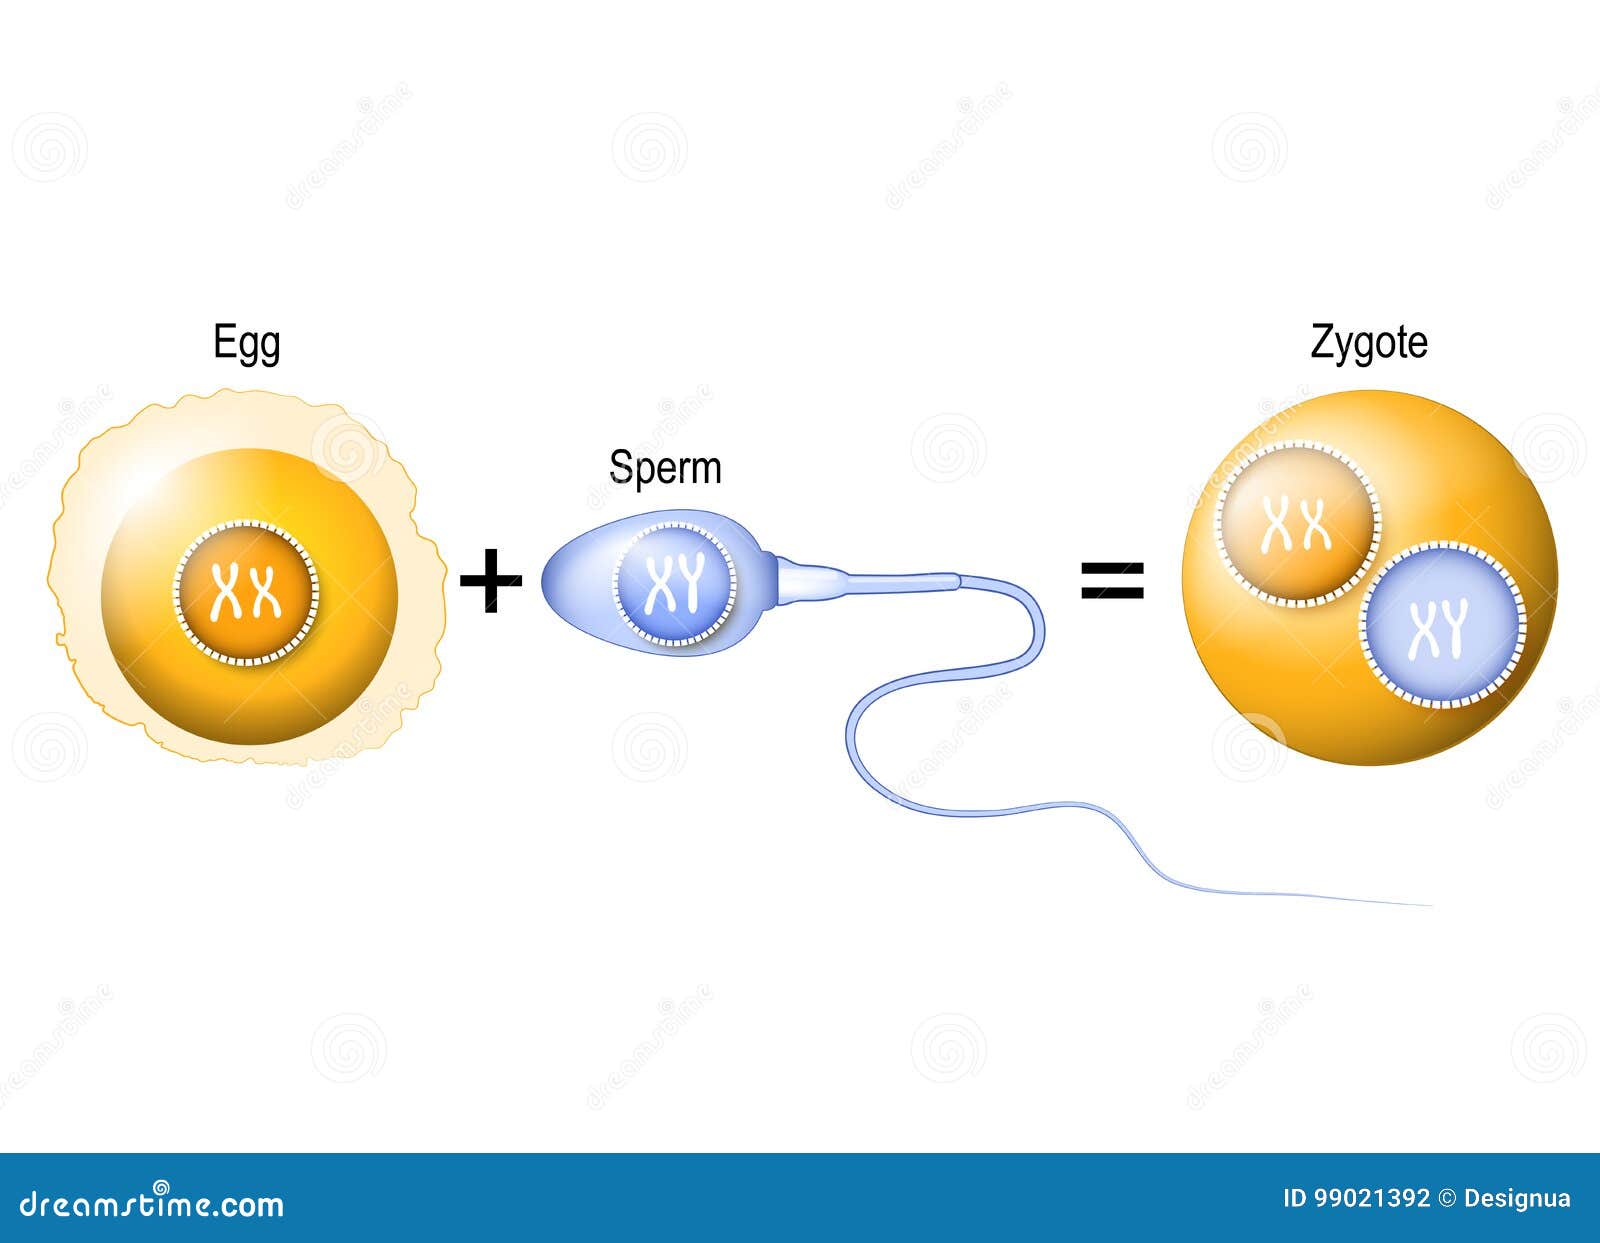 human egg, sperm and zygote